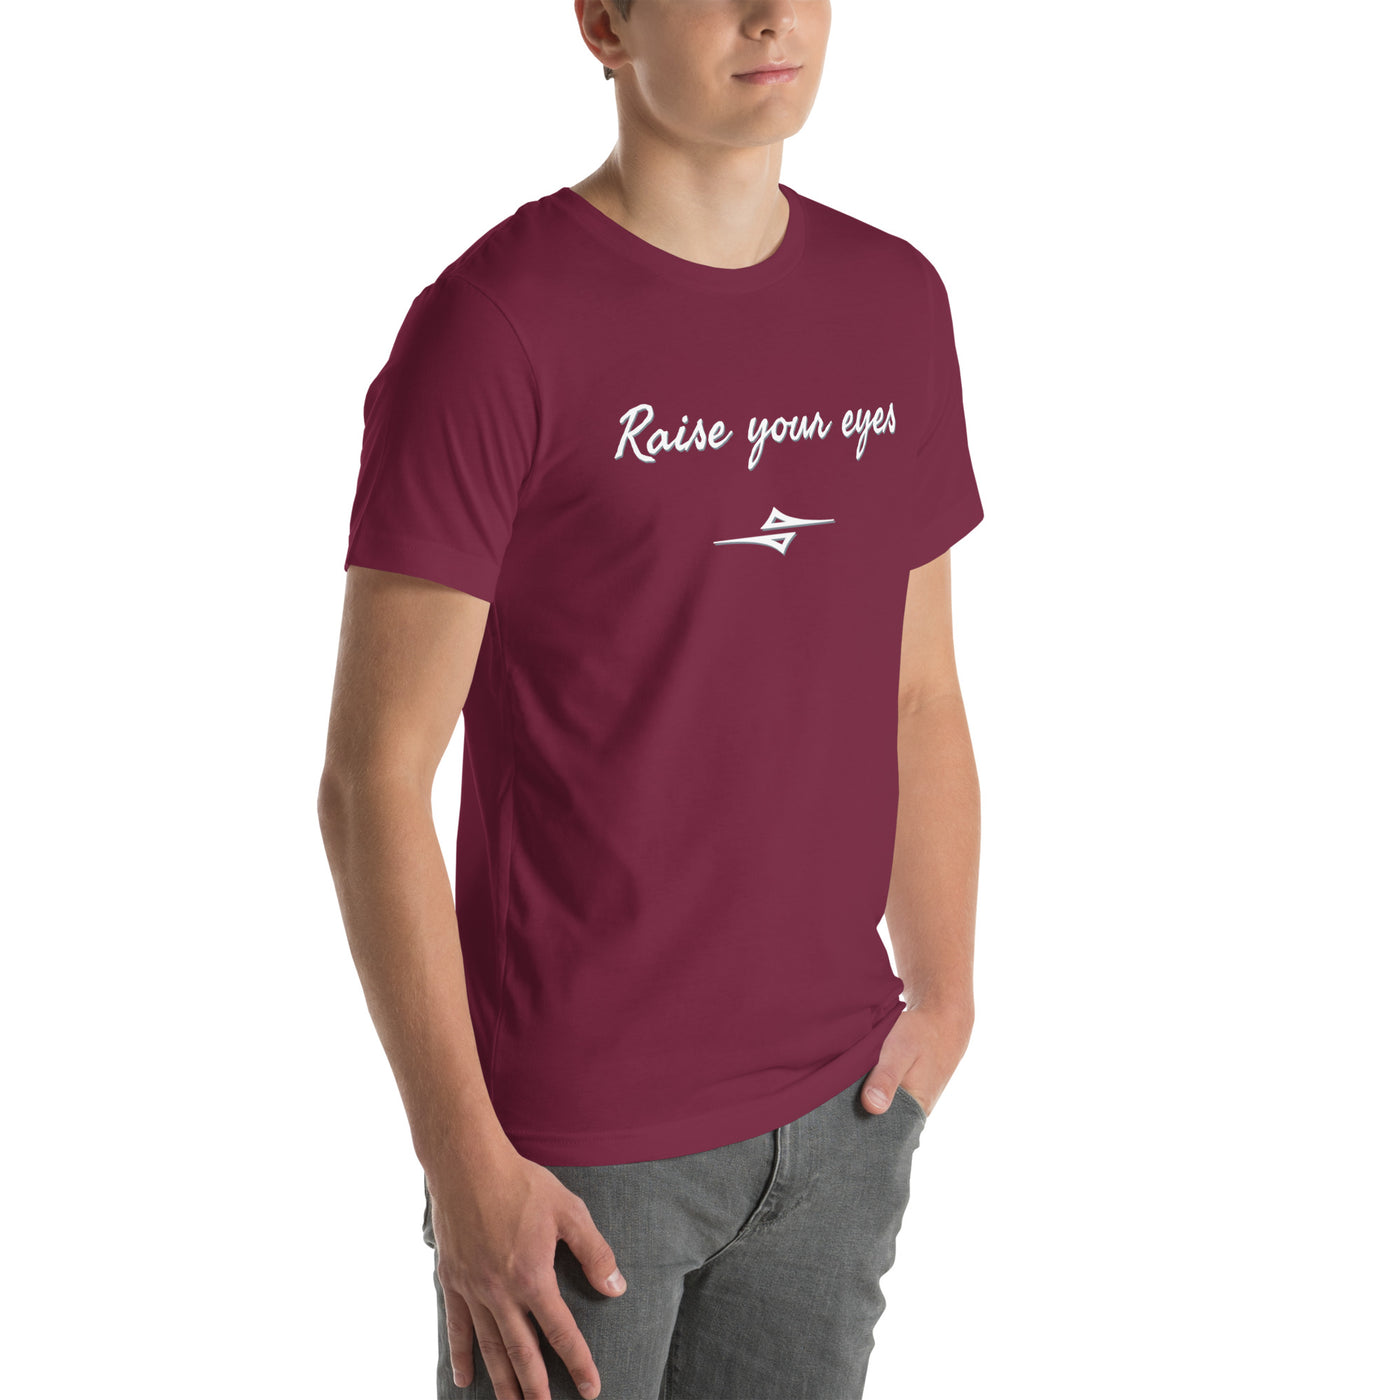 4iCe Elite Boxing Apparel maroon Raise your eyes t-shirt